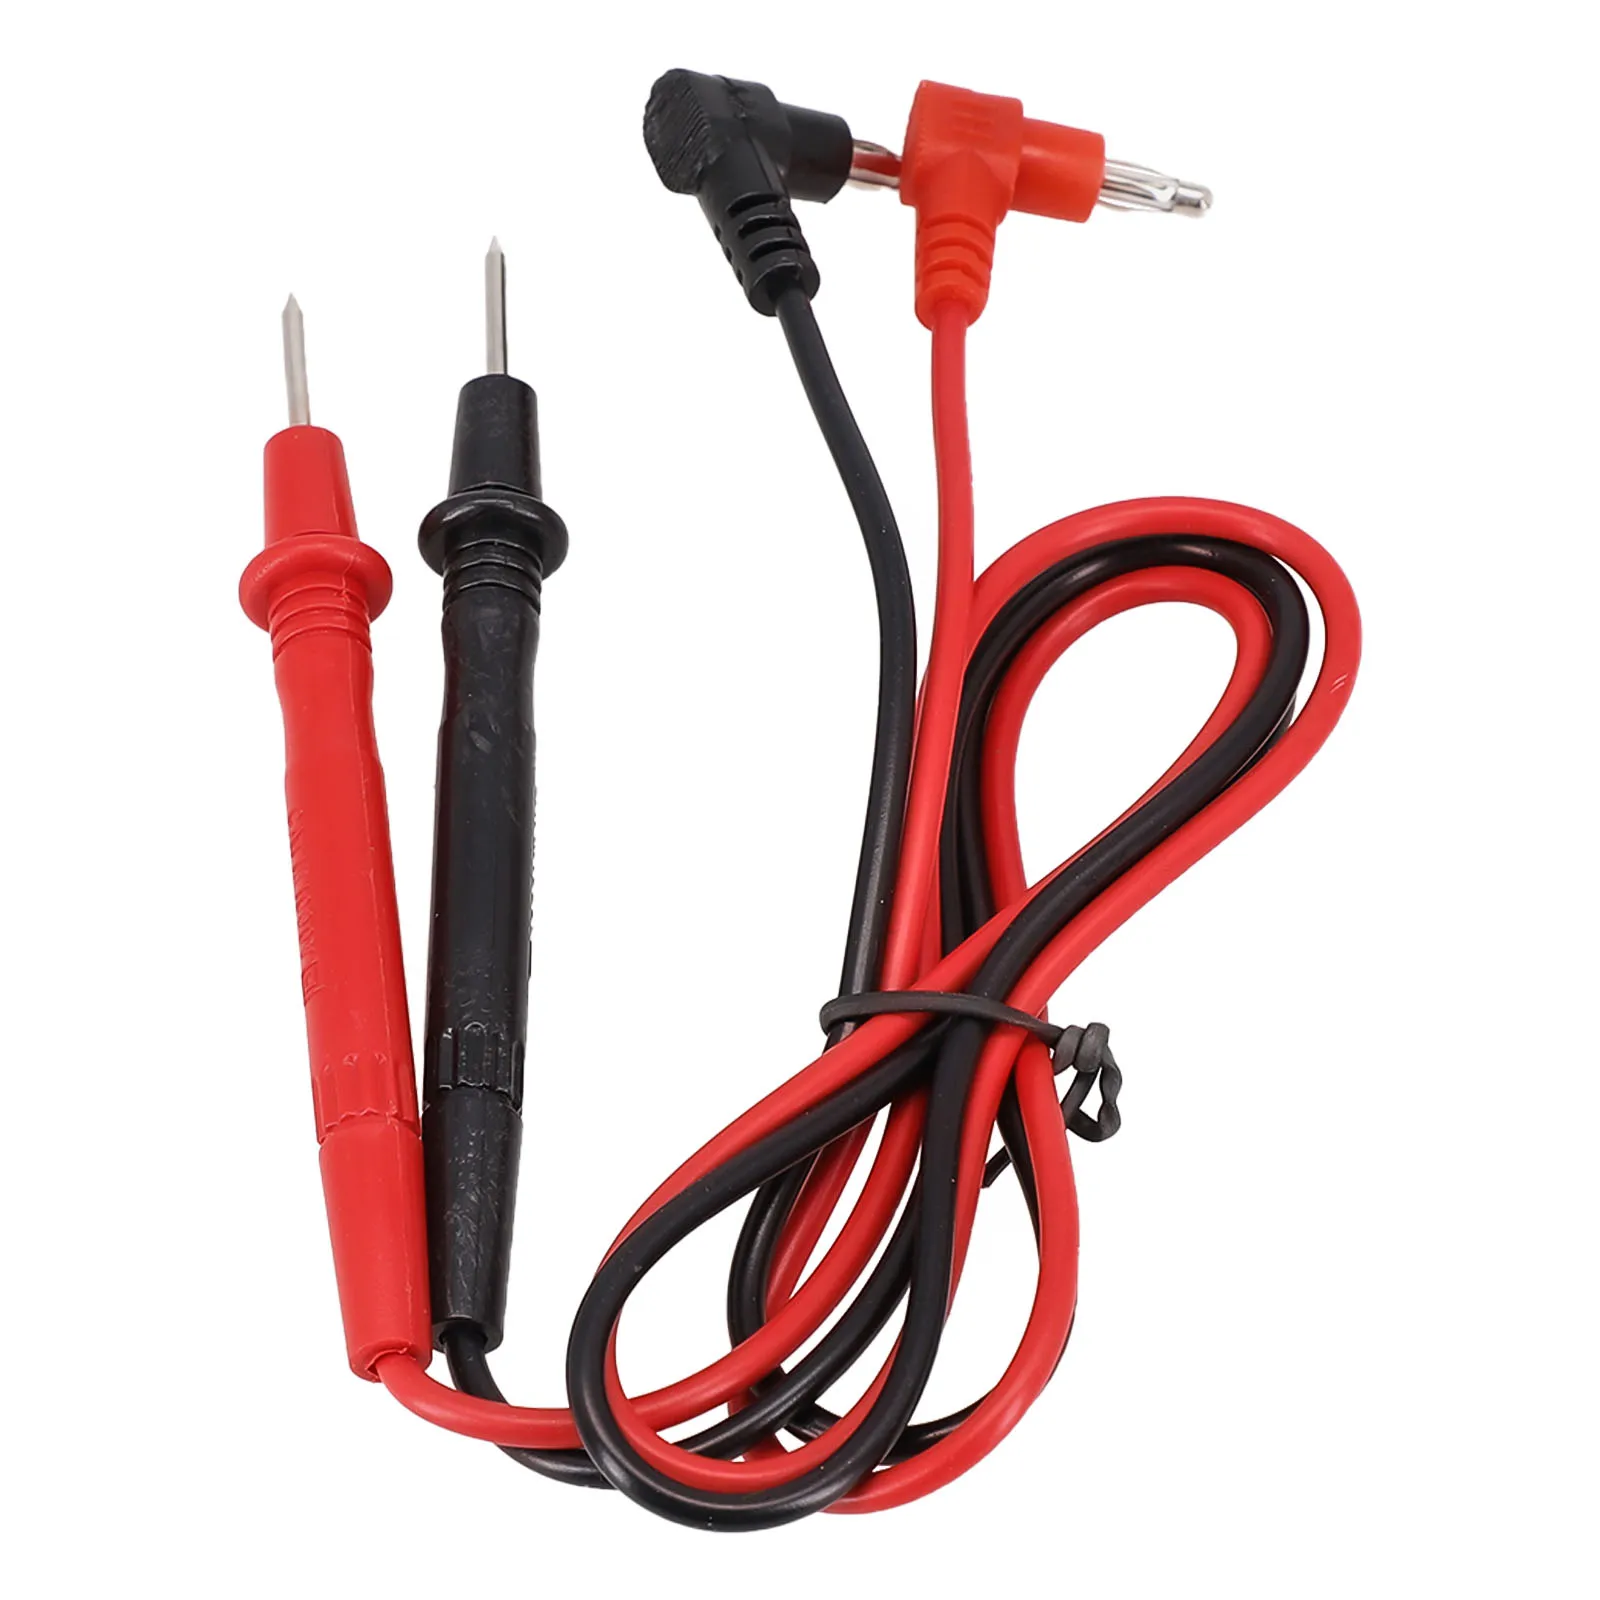 

70cm Length 1 Pair Universal 1000v 10A Probe Multimeter Test Leads For Digital Multi Meter Tester Lead Probe Wire Pen Cable Tool